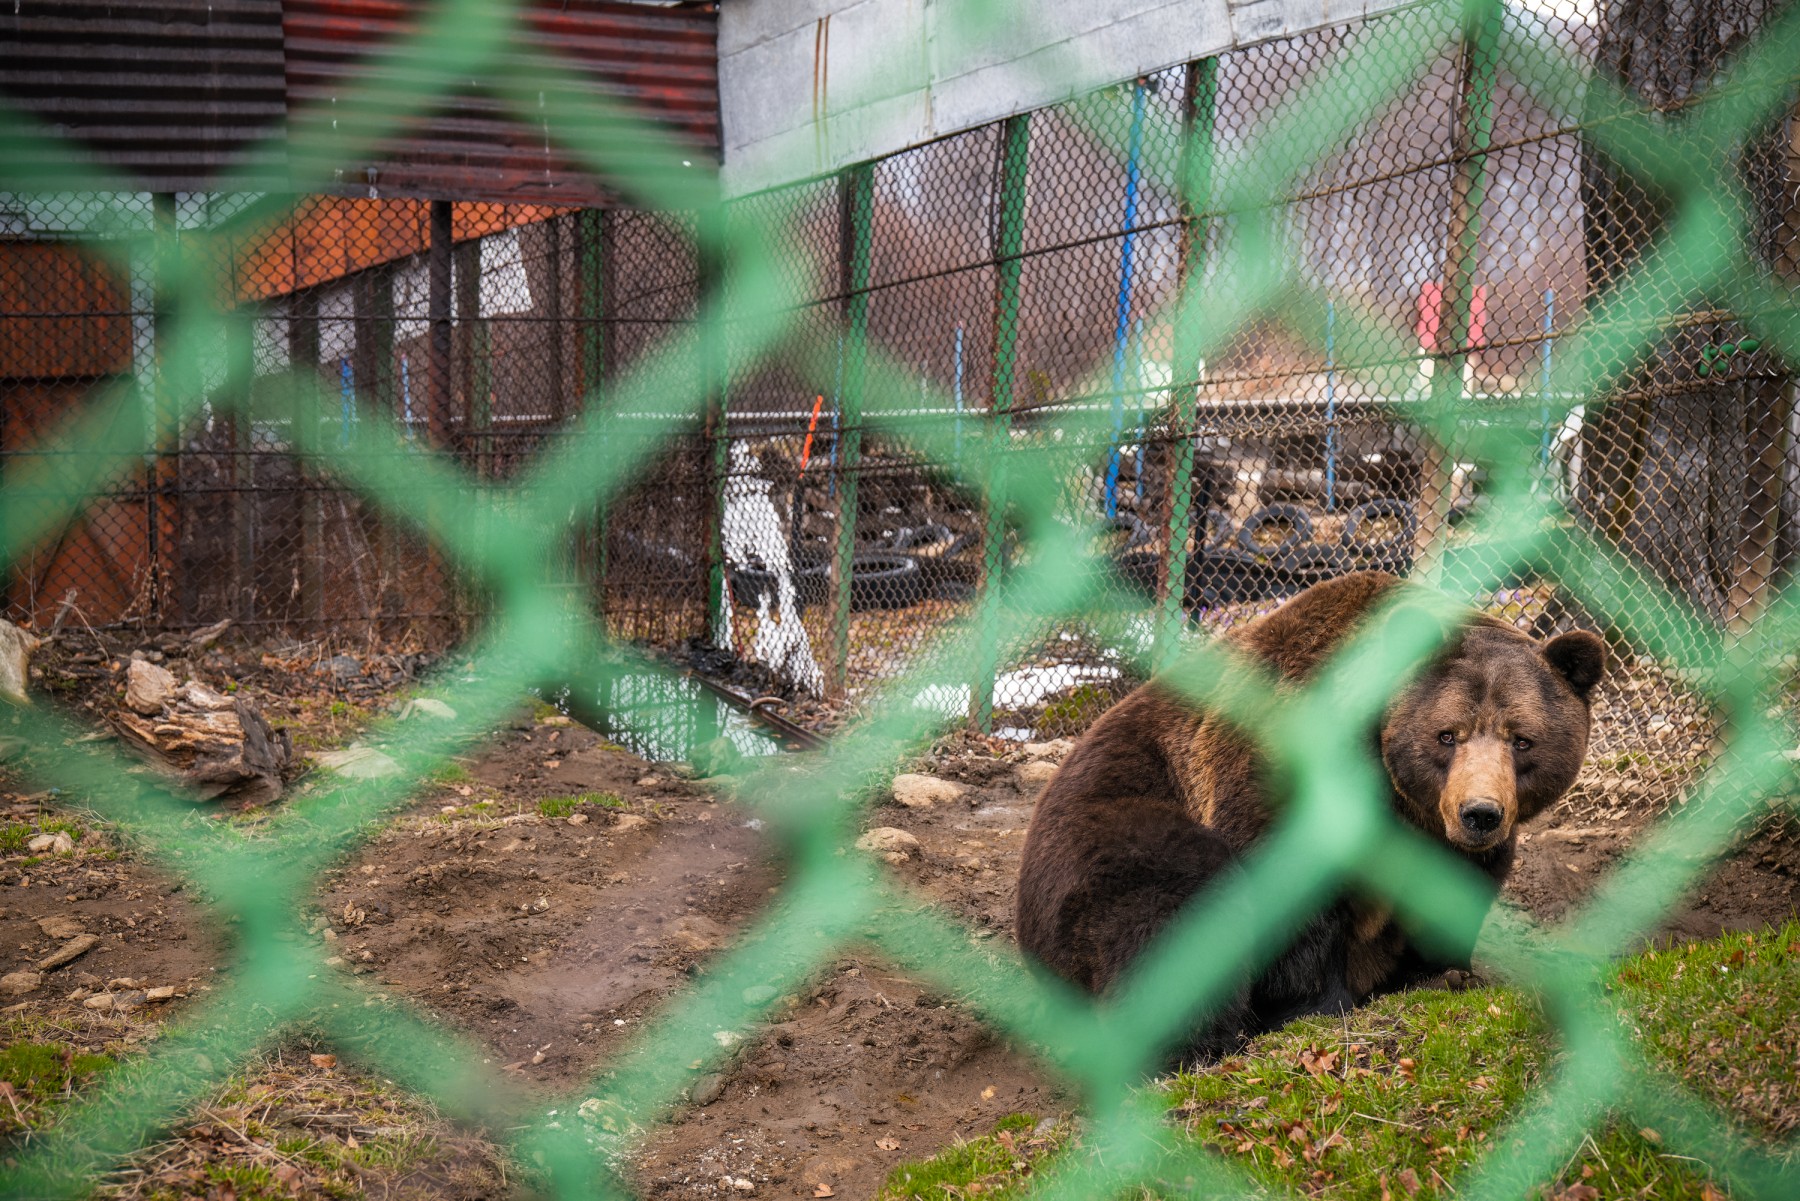 Baloo the bear pictured in his cage